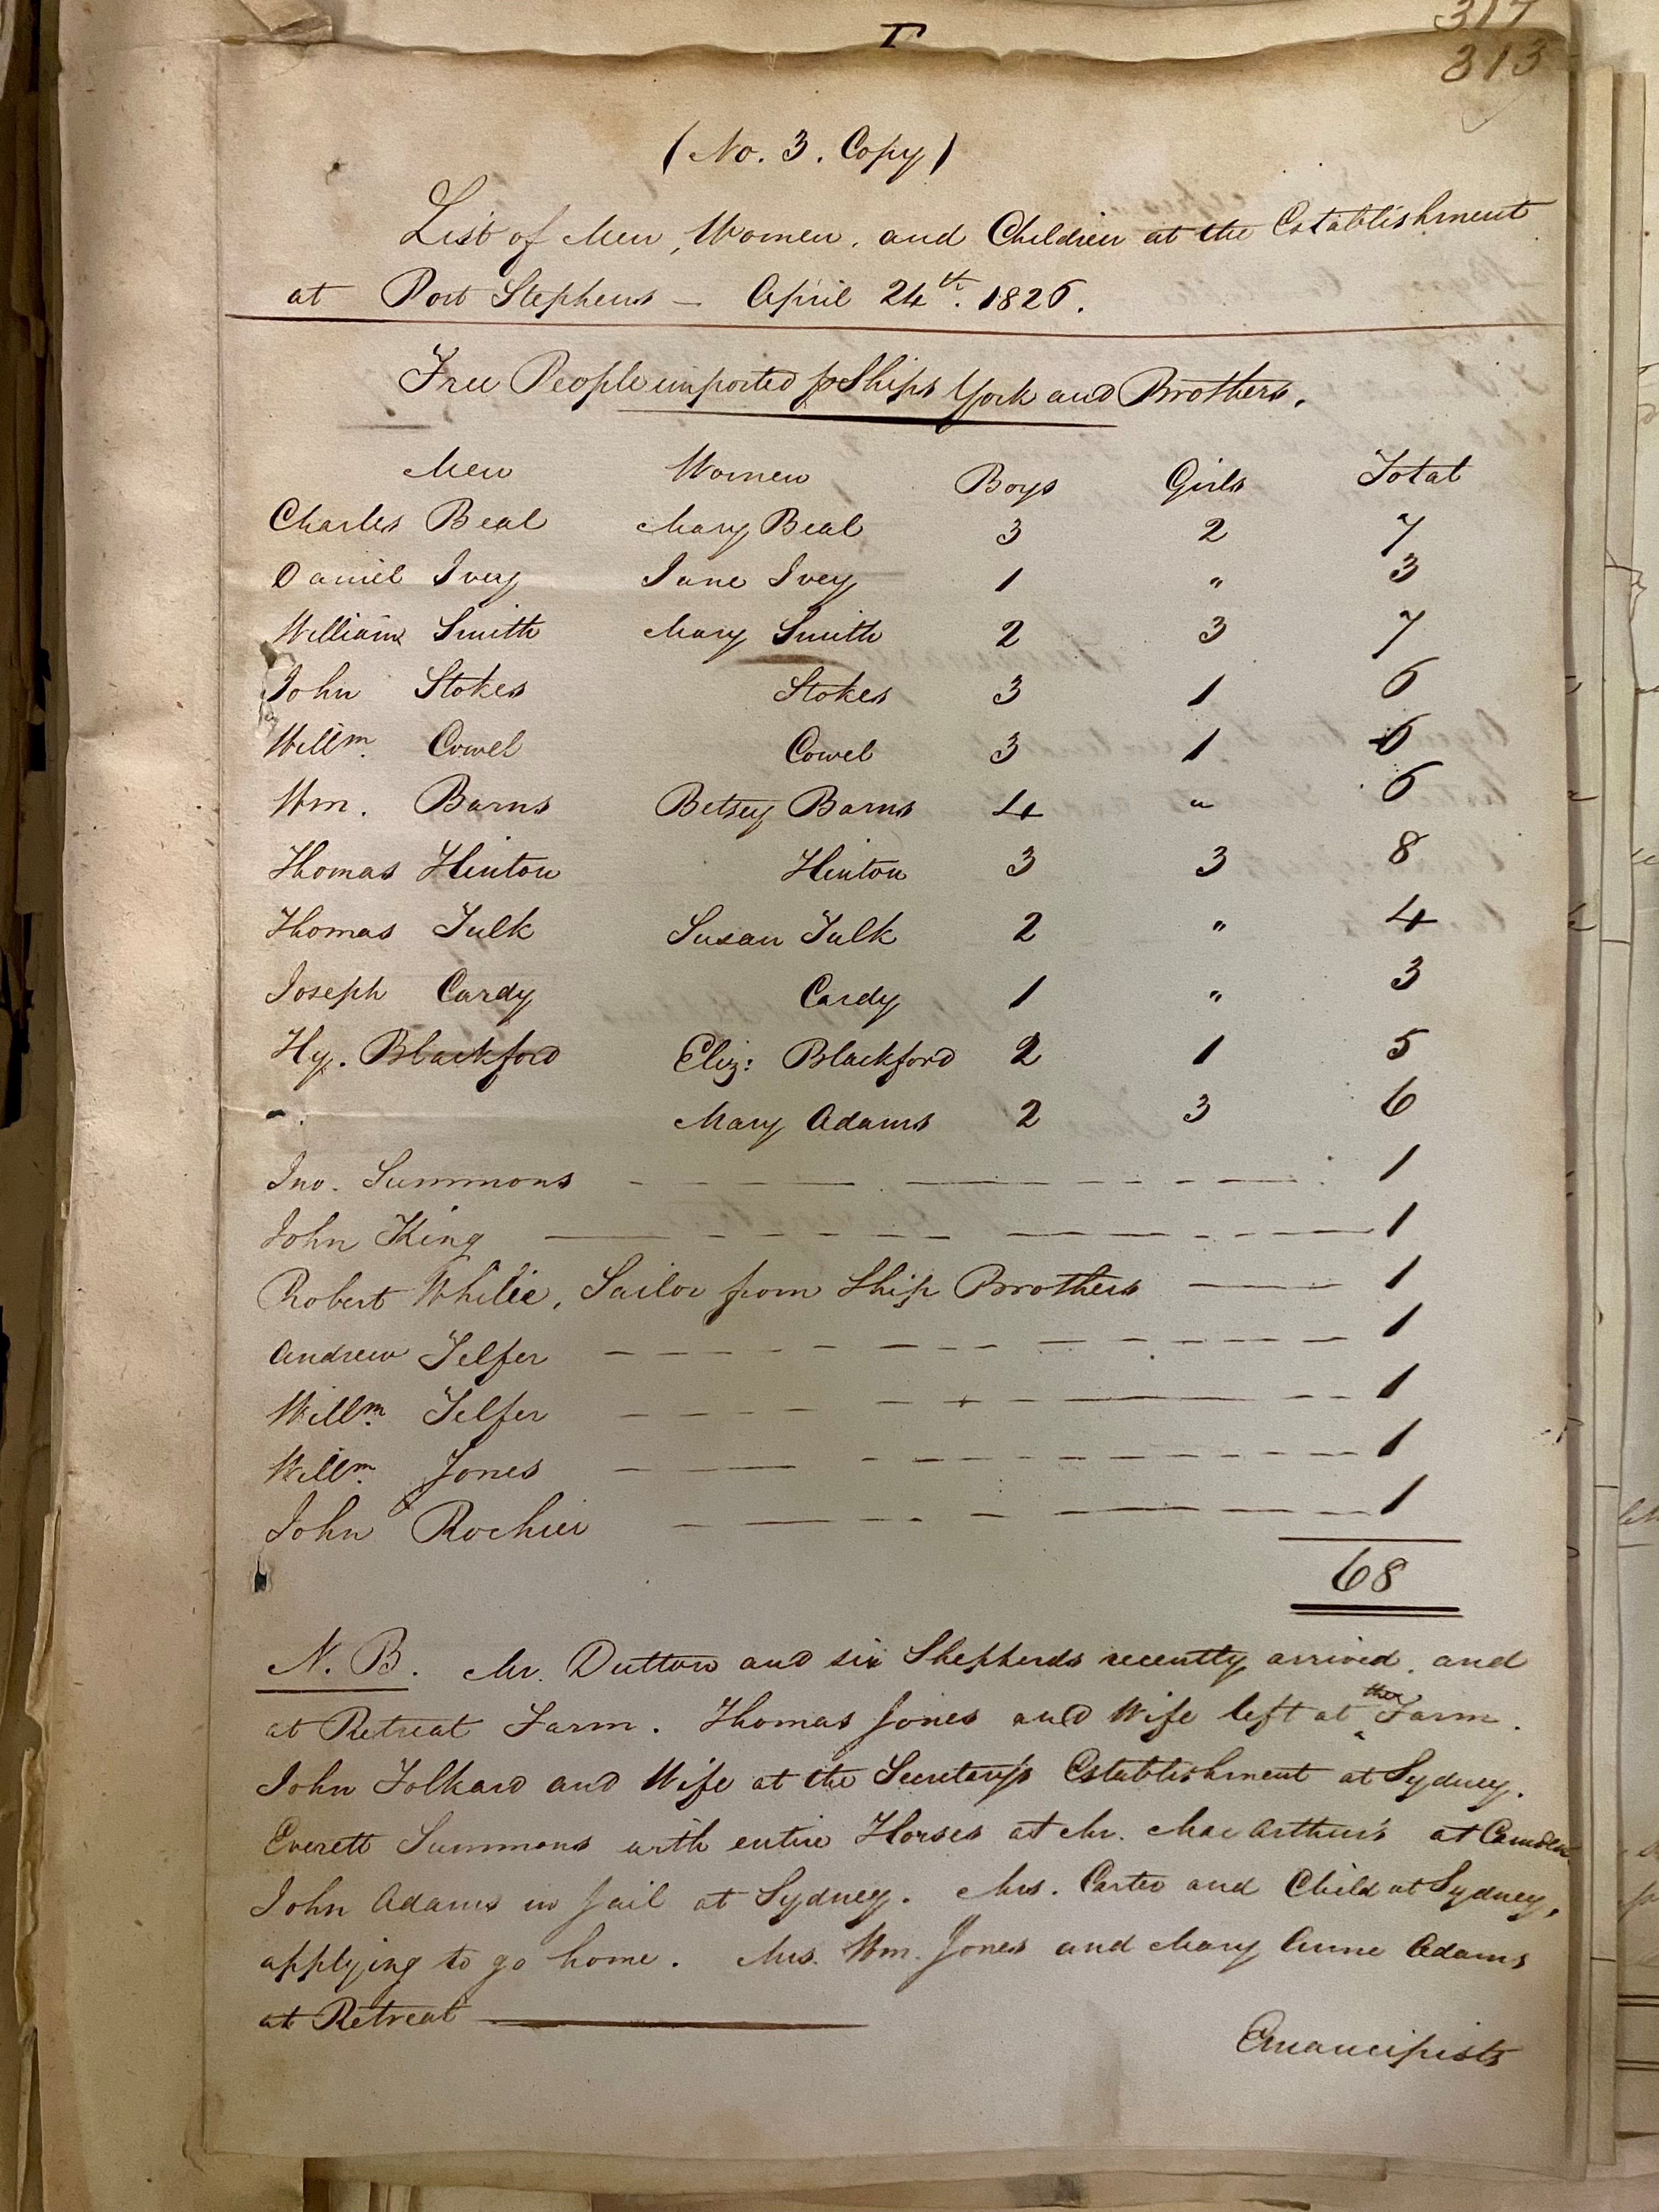 Despatch recording the men, women, and children residing at the Australian Agricultural Company's Port Stephens Estate, New South Wales, 24 April 1826 (78-1-1).